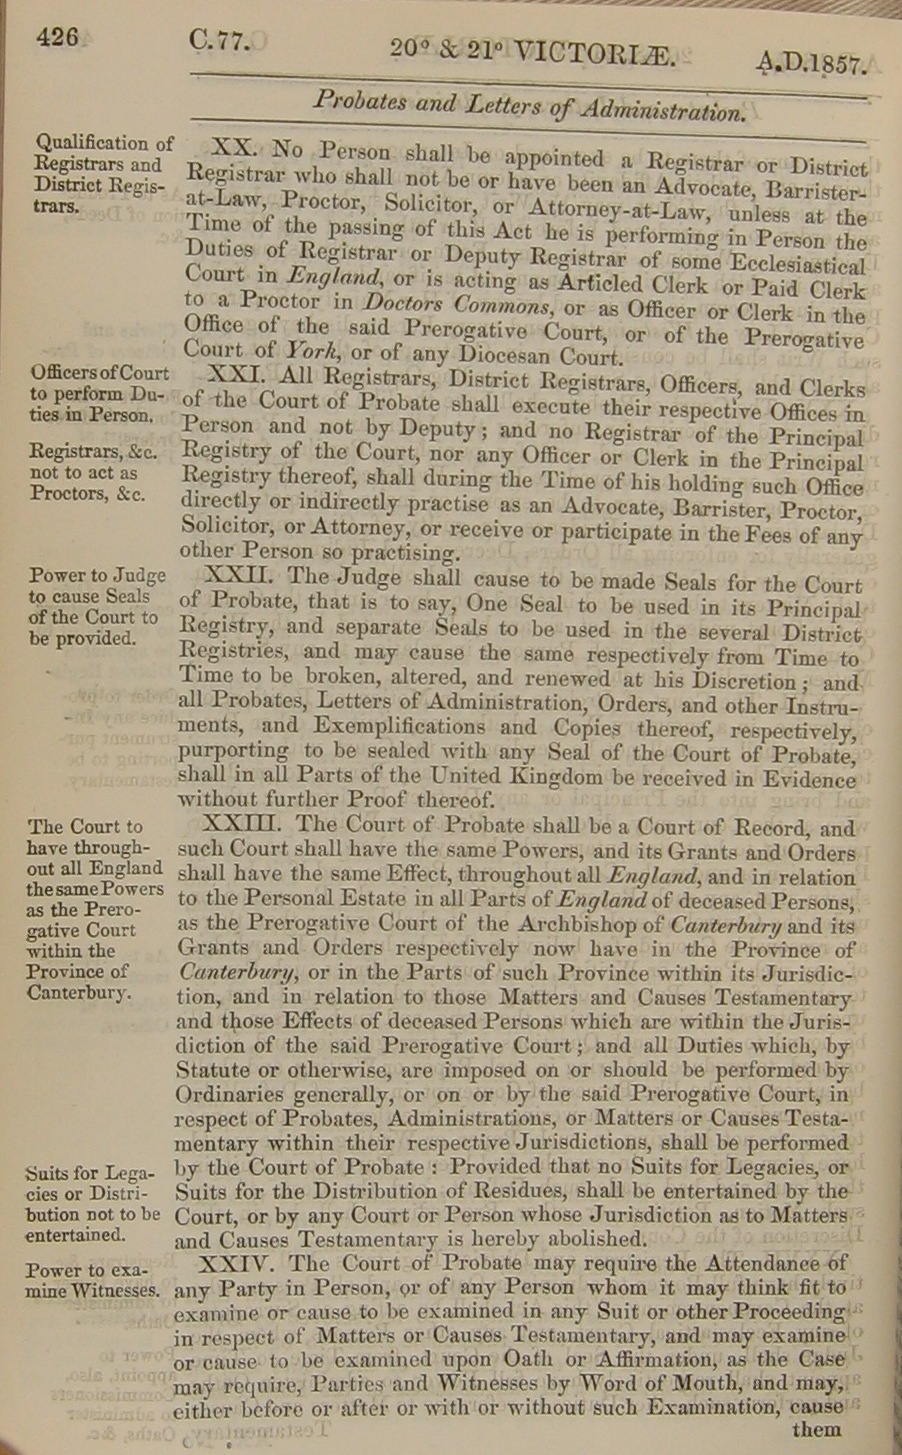 Image of 20 & 21 Victoria I, c. 77 (page 5 of 34). Click for larger image.